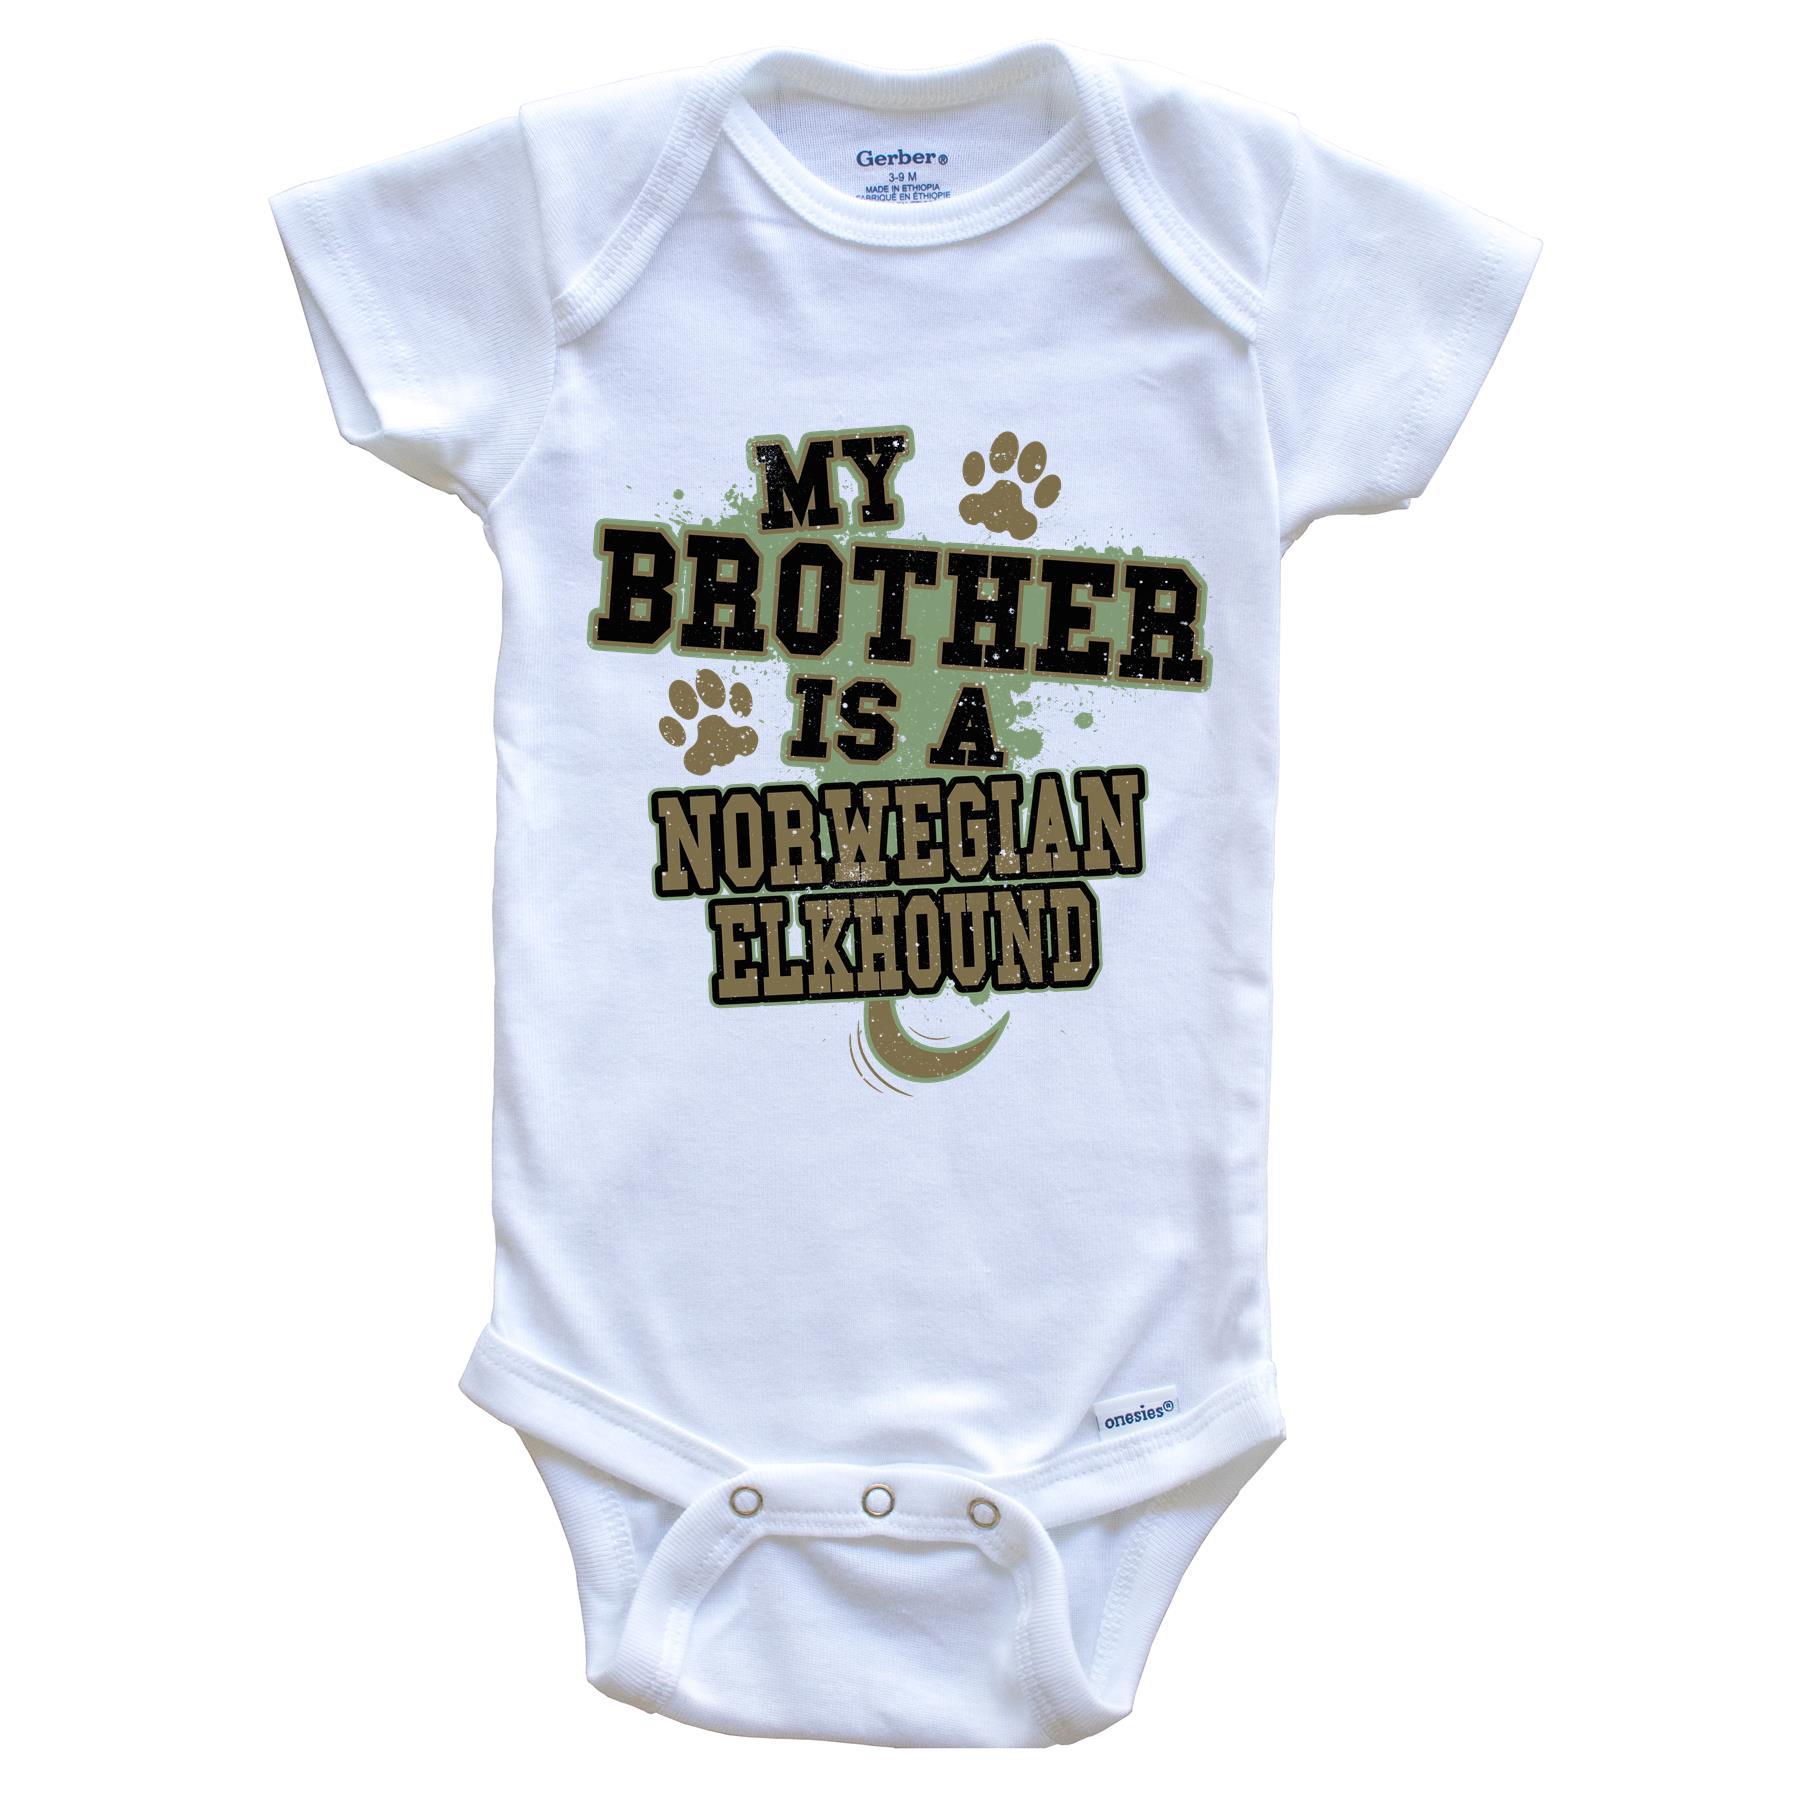 My Brother Is A Norwegian Elkhound Funny Dog Baby Onesie